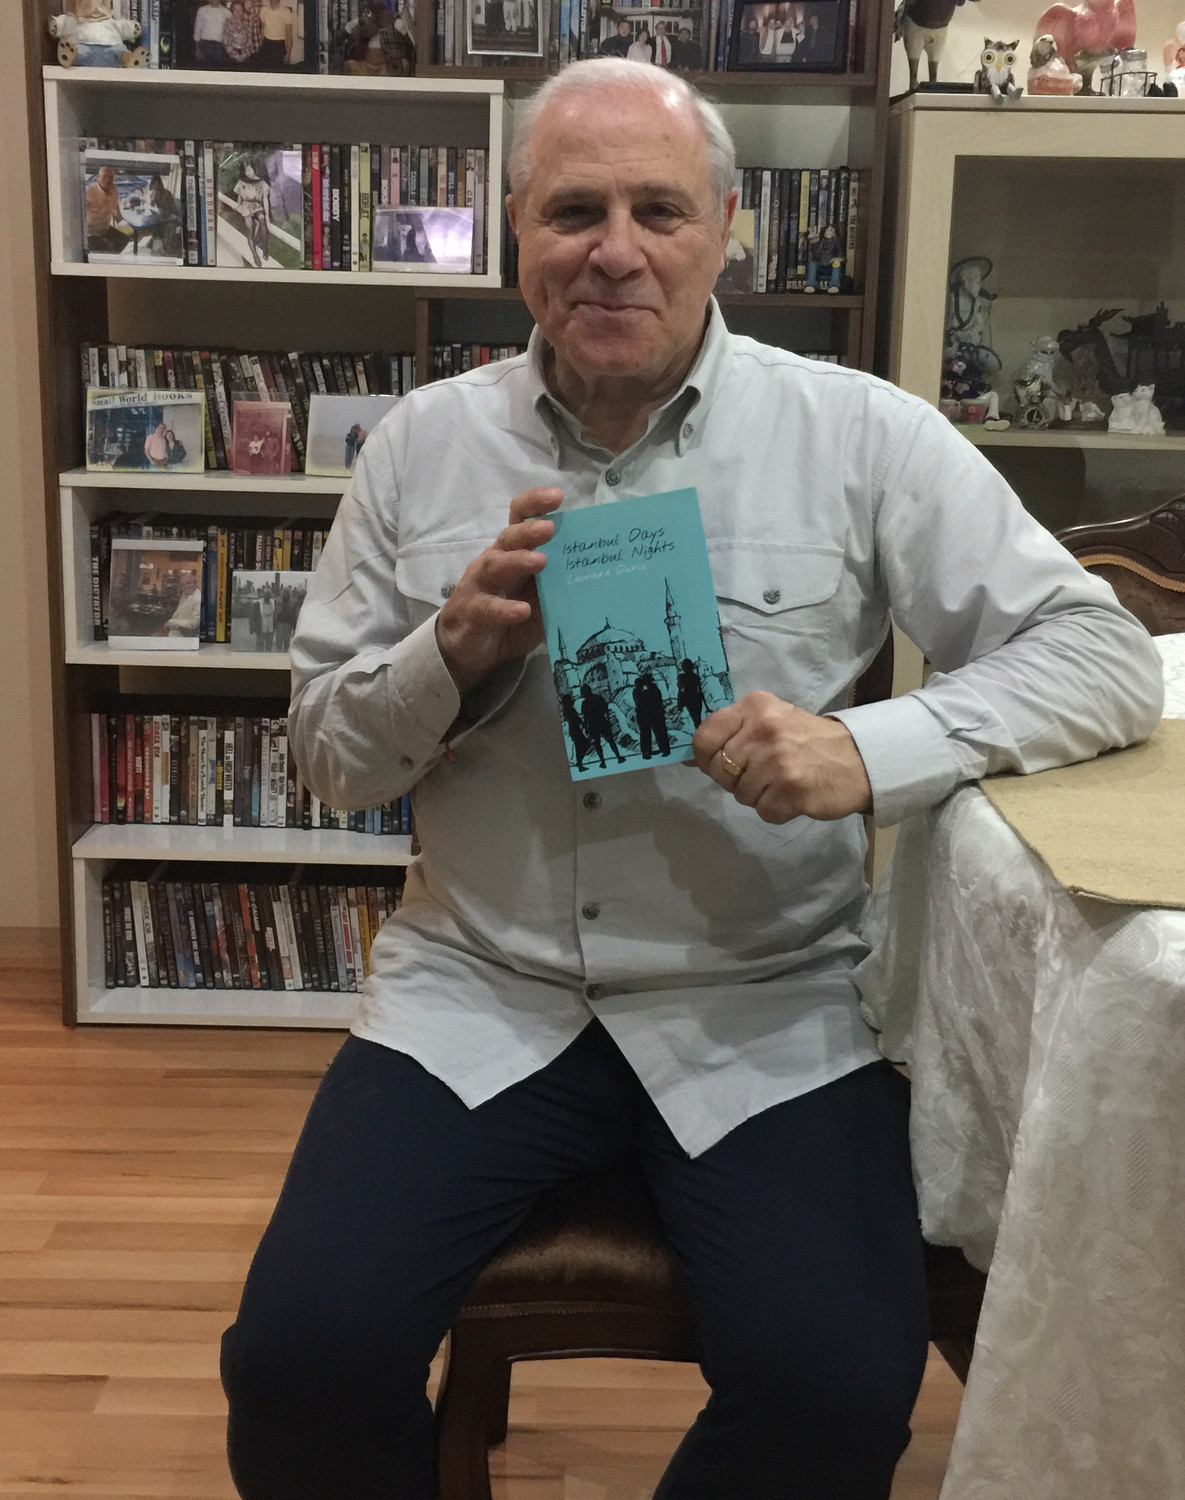 Leonard Durso recently published his new book “Istanbul Days, Istanbul Nights.”